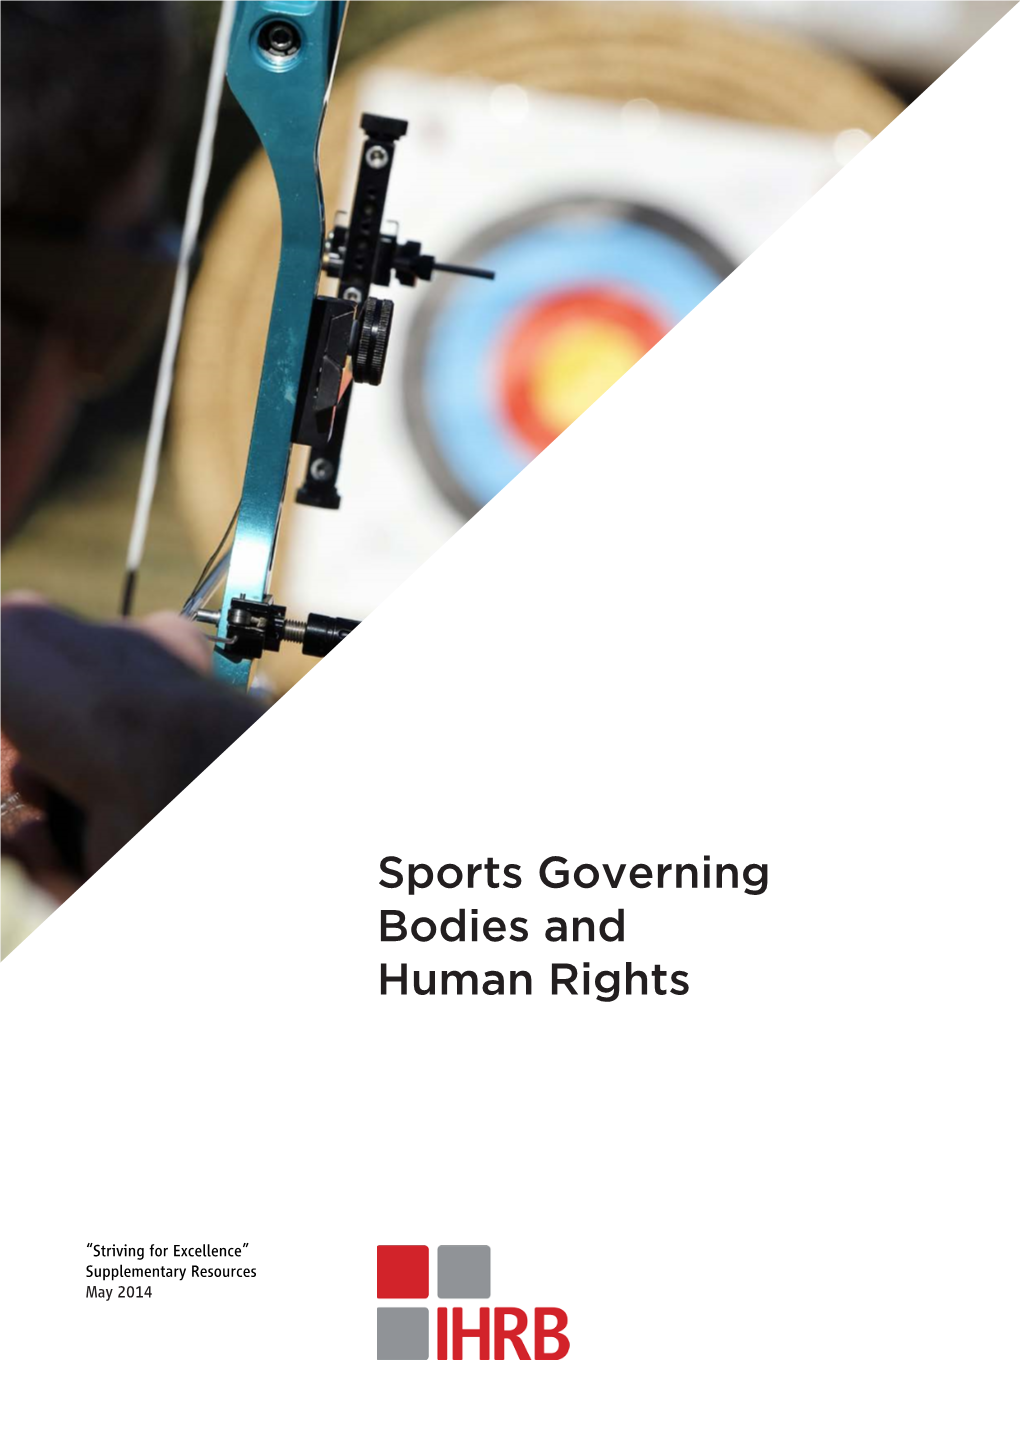 Sports Governing Bodies and Human Rights, May 2014